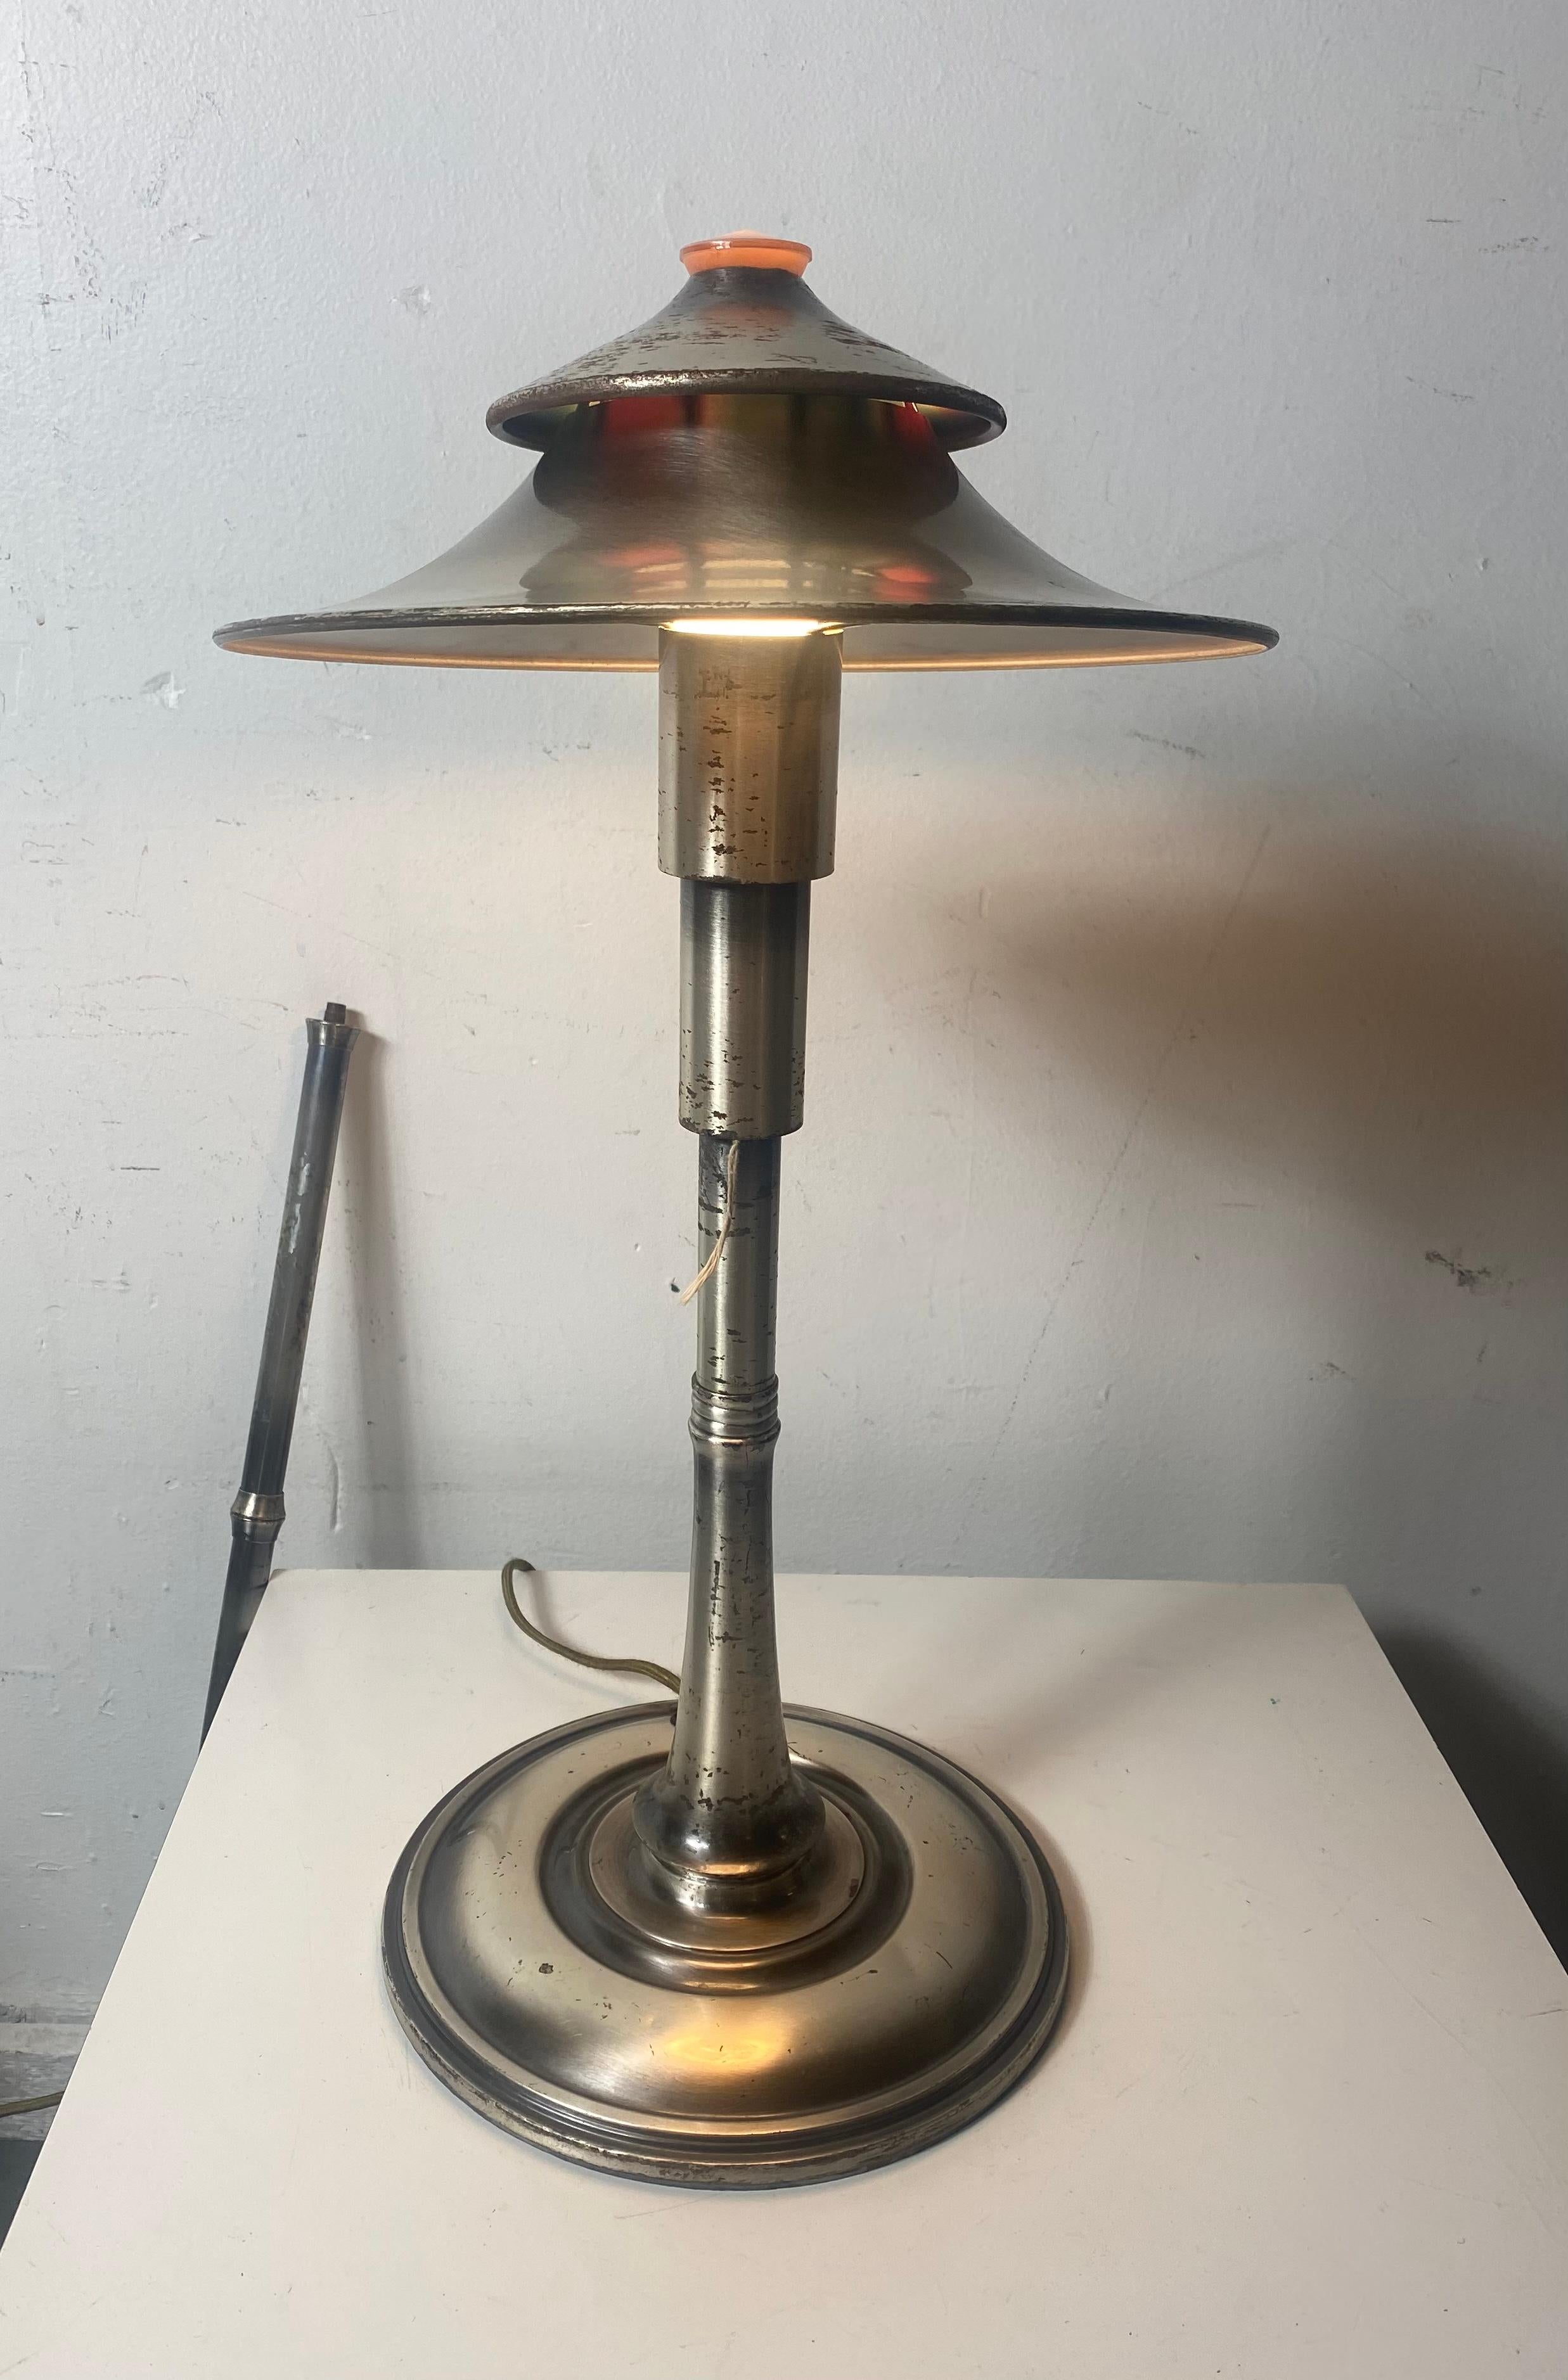 Early 20th Century Art Deco Modernist Table or Floor Lamp by Leroy C. Doane for Miller